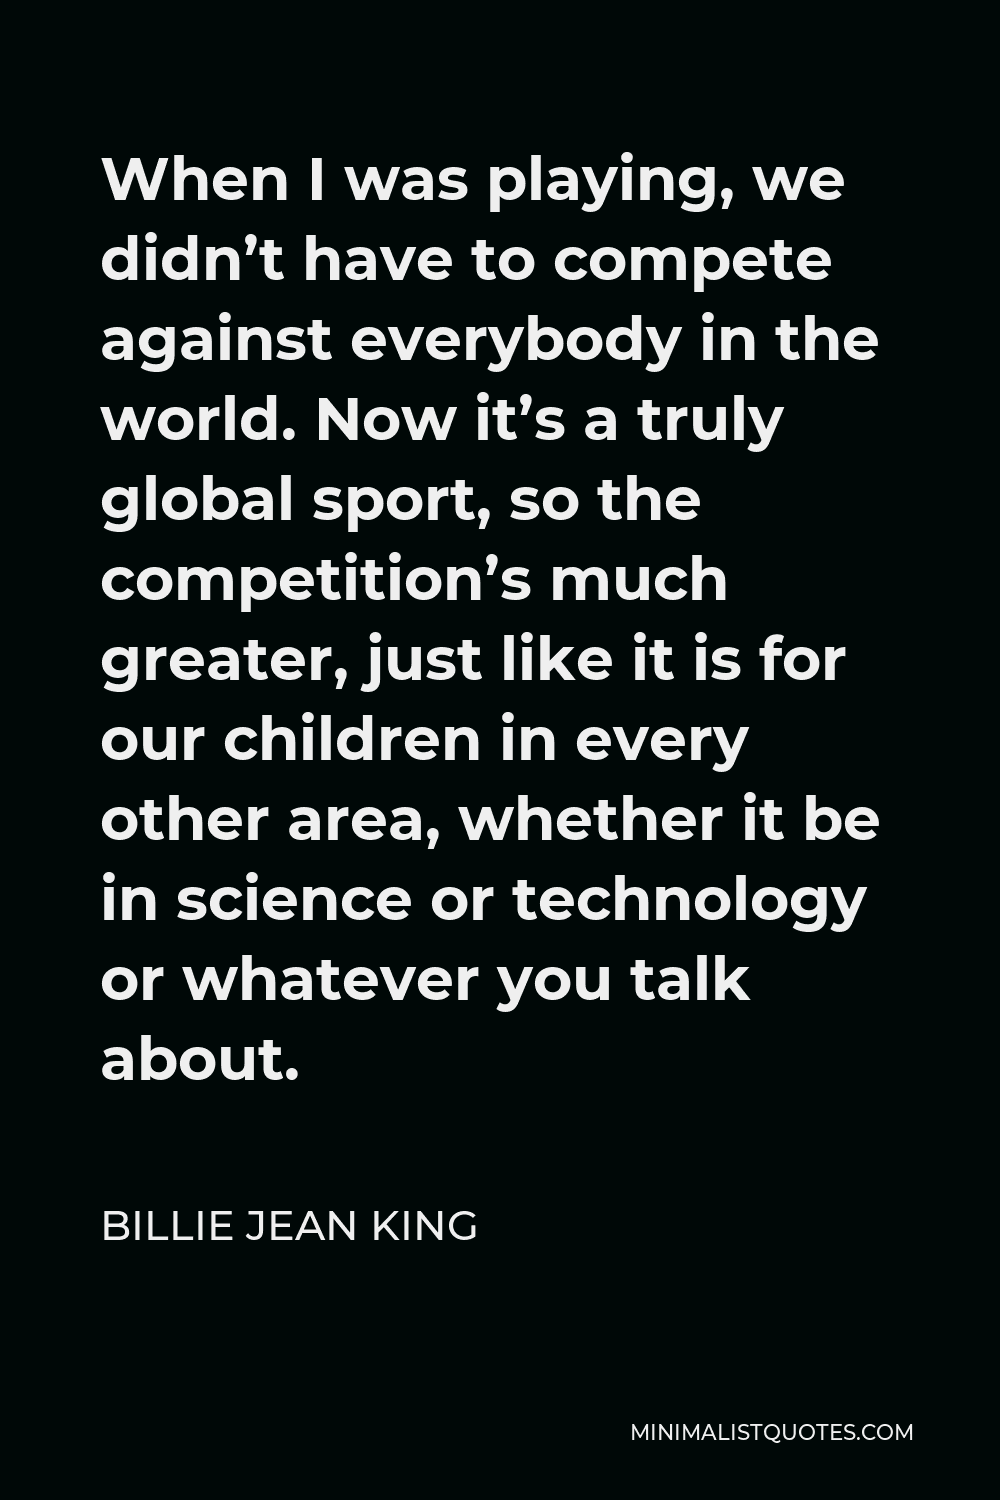 Billie Jean King Quote - When I was playing, we didn’t have to compete against everybody in the world. Now it’s a truly global sport, so the competition’s much greater, just like it is for our children in every other area, whether it be in science or technology or whatever you talk about.